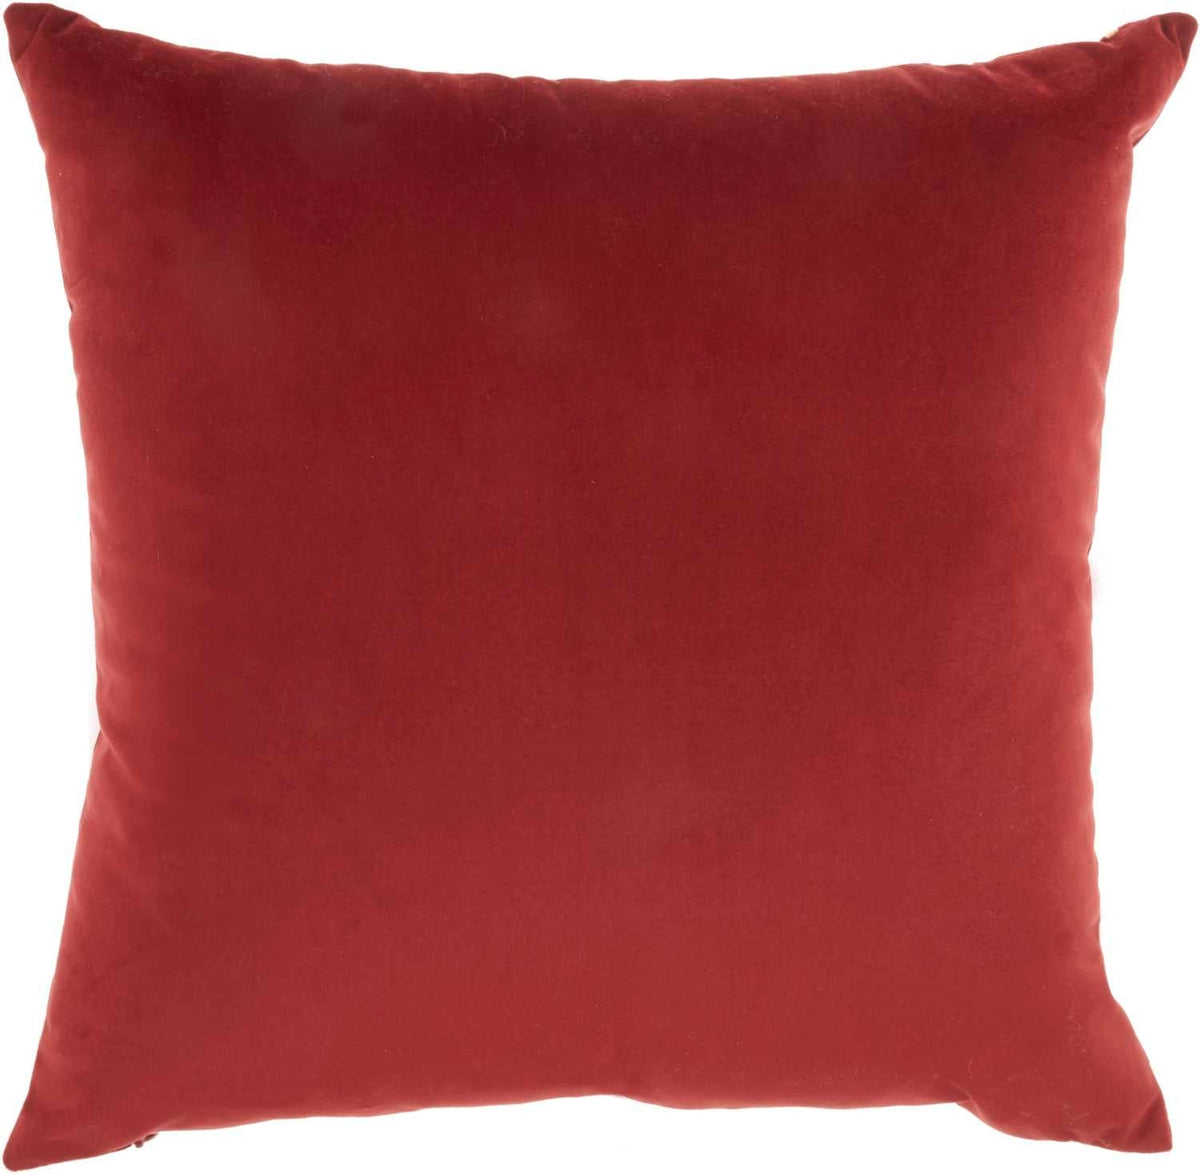 Fenne 18" x 18" Red Throw Pillow - Elegance Collection